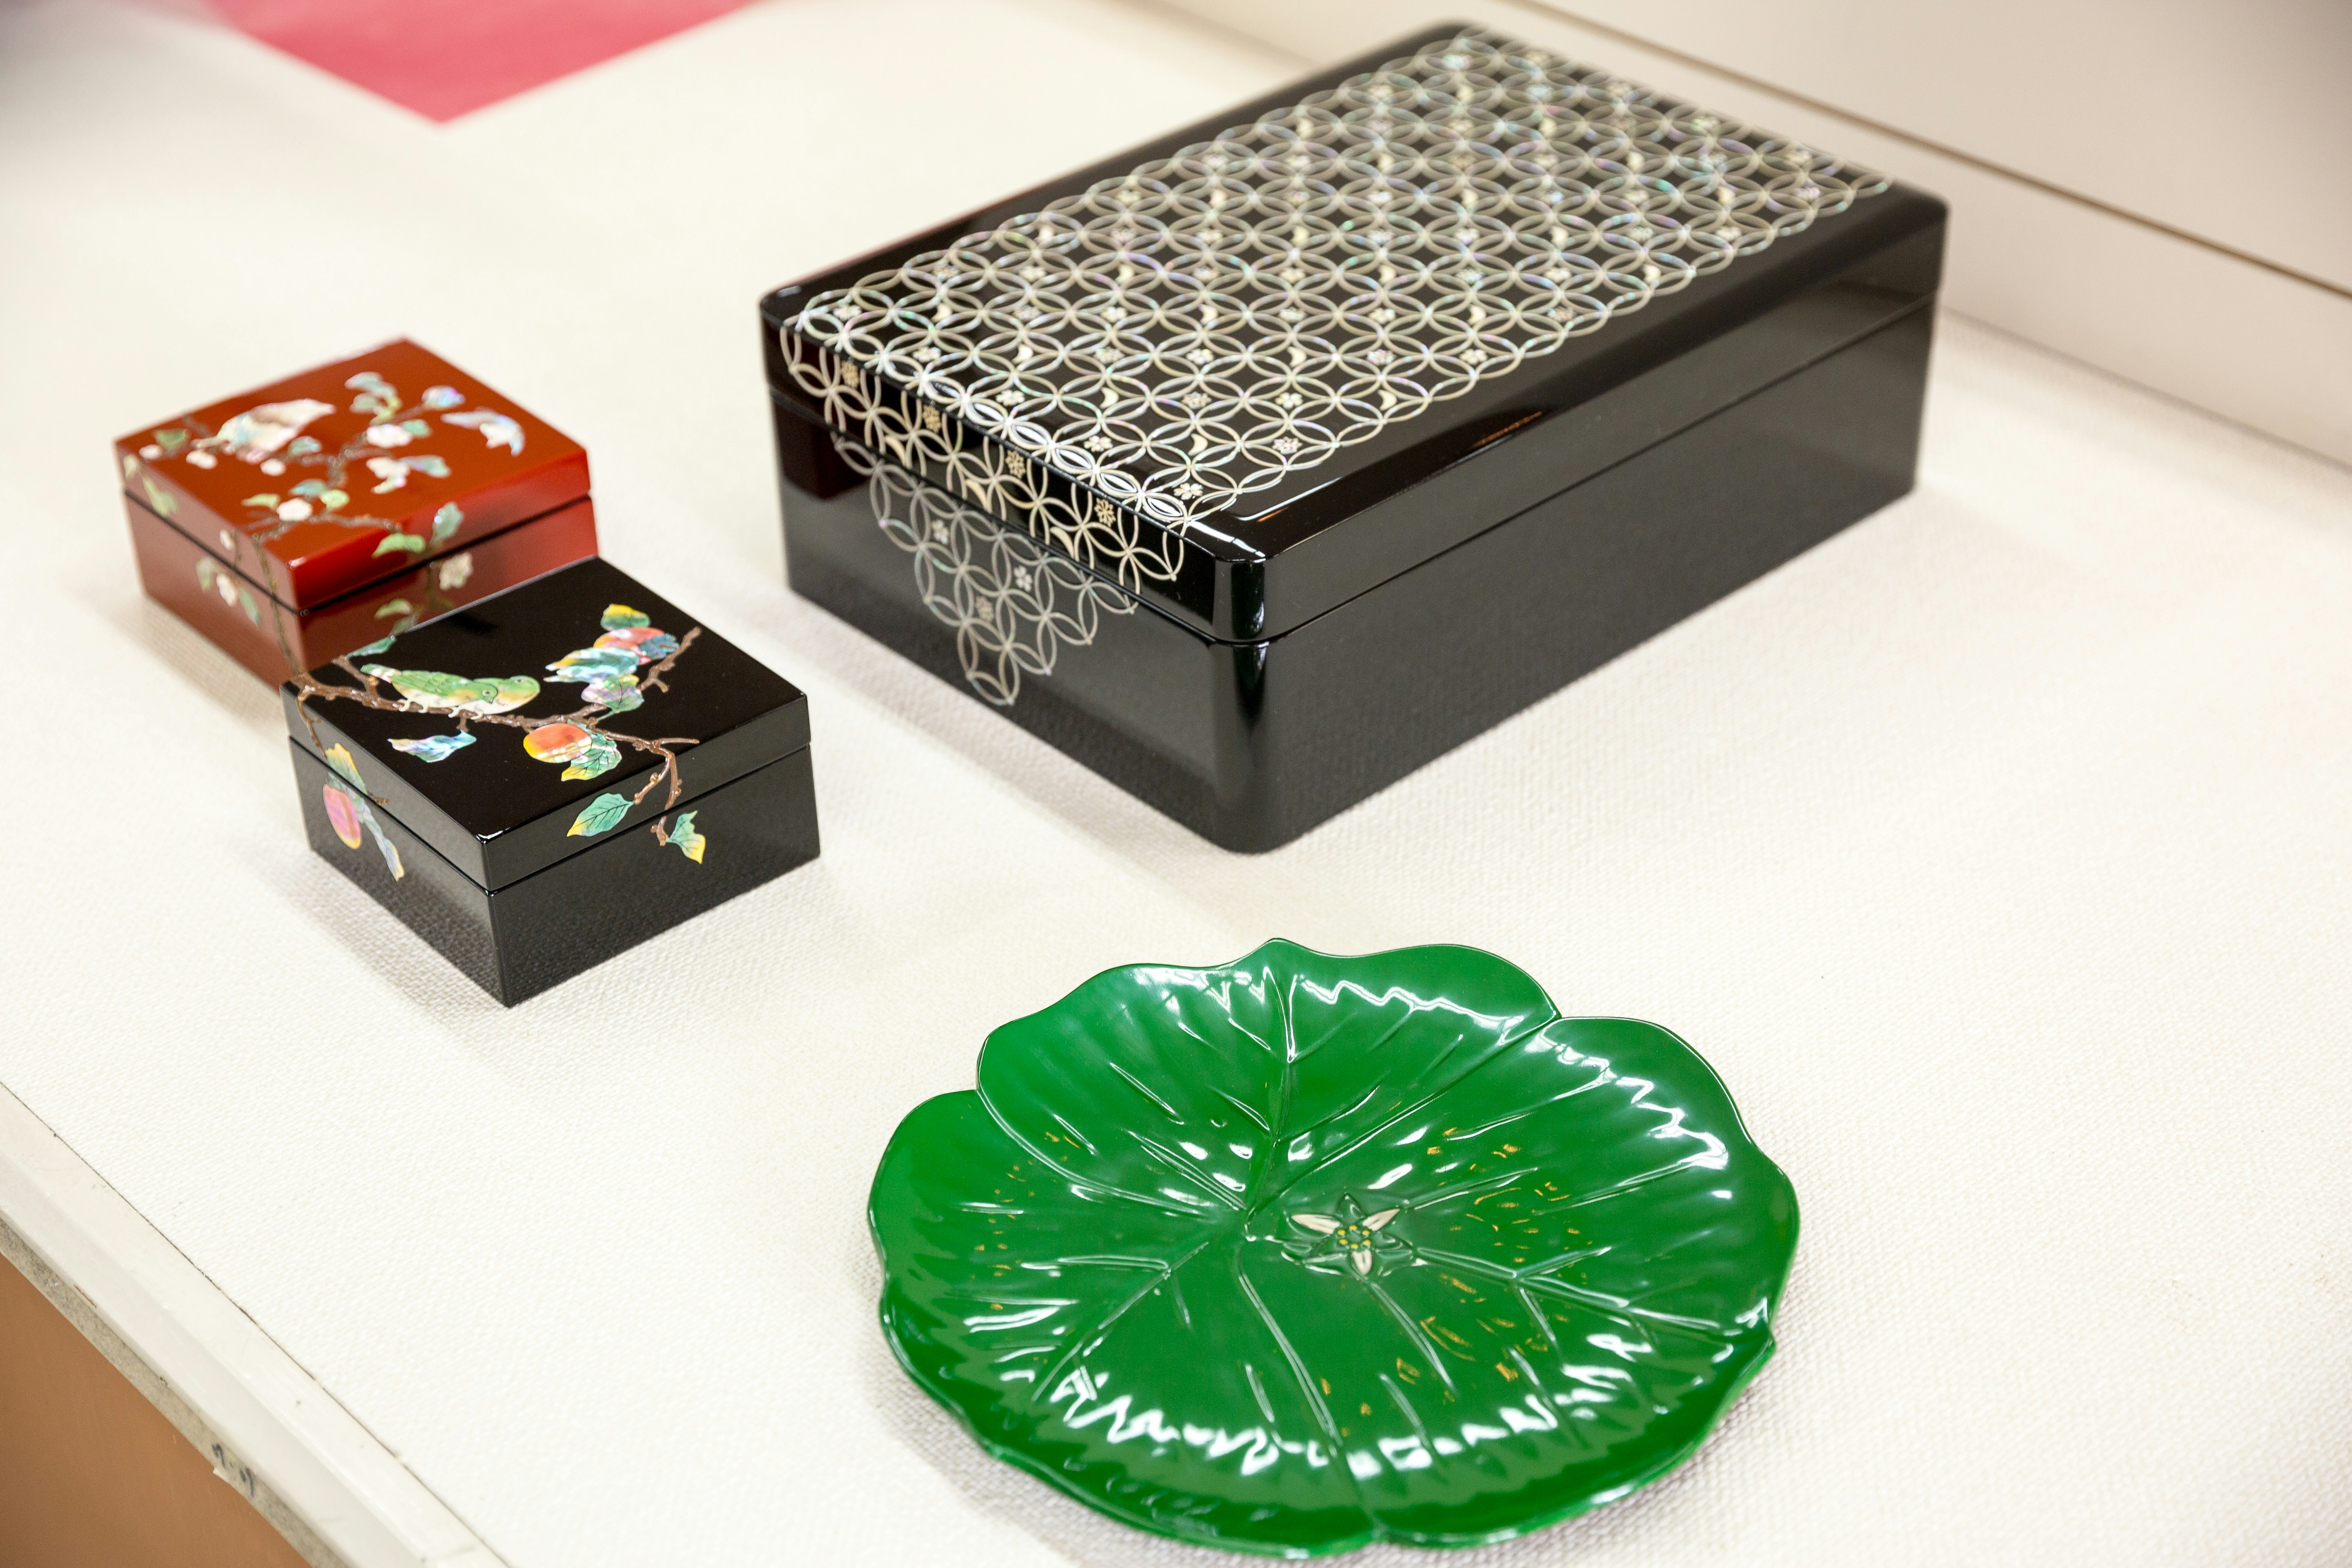 Two small jewellery boxes with intricate lacquerware birds and flowers on them, sat near a bento box with a geometric design, and a small green dish